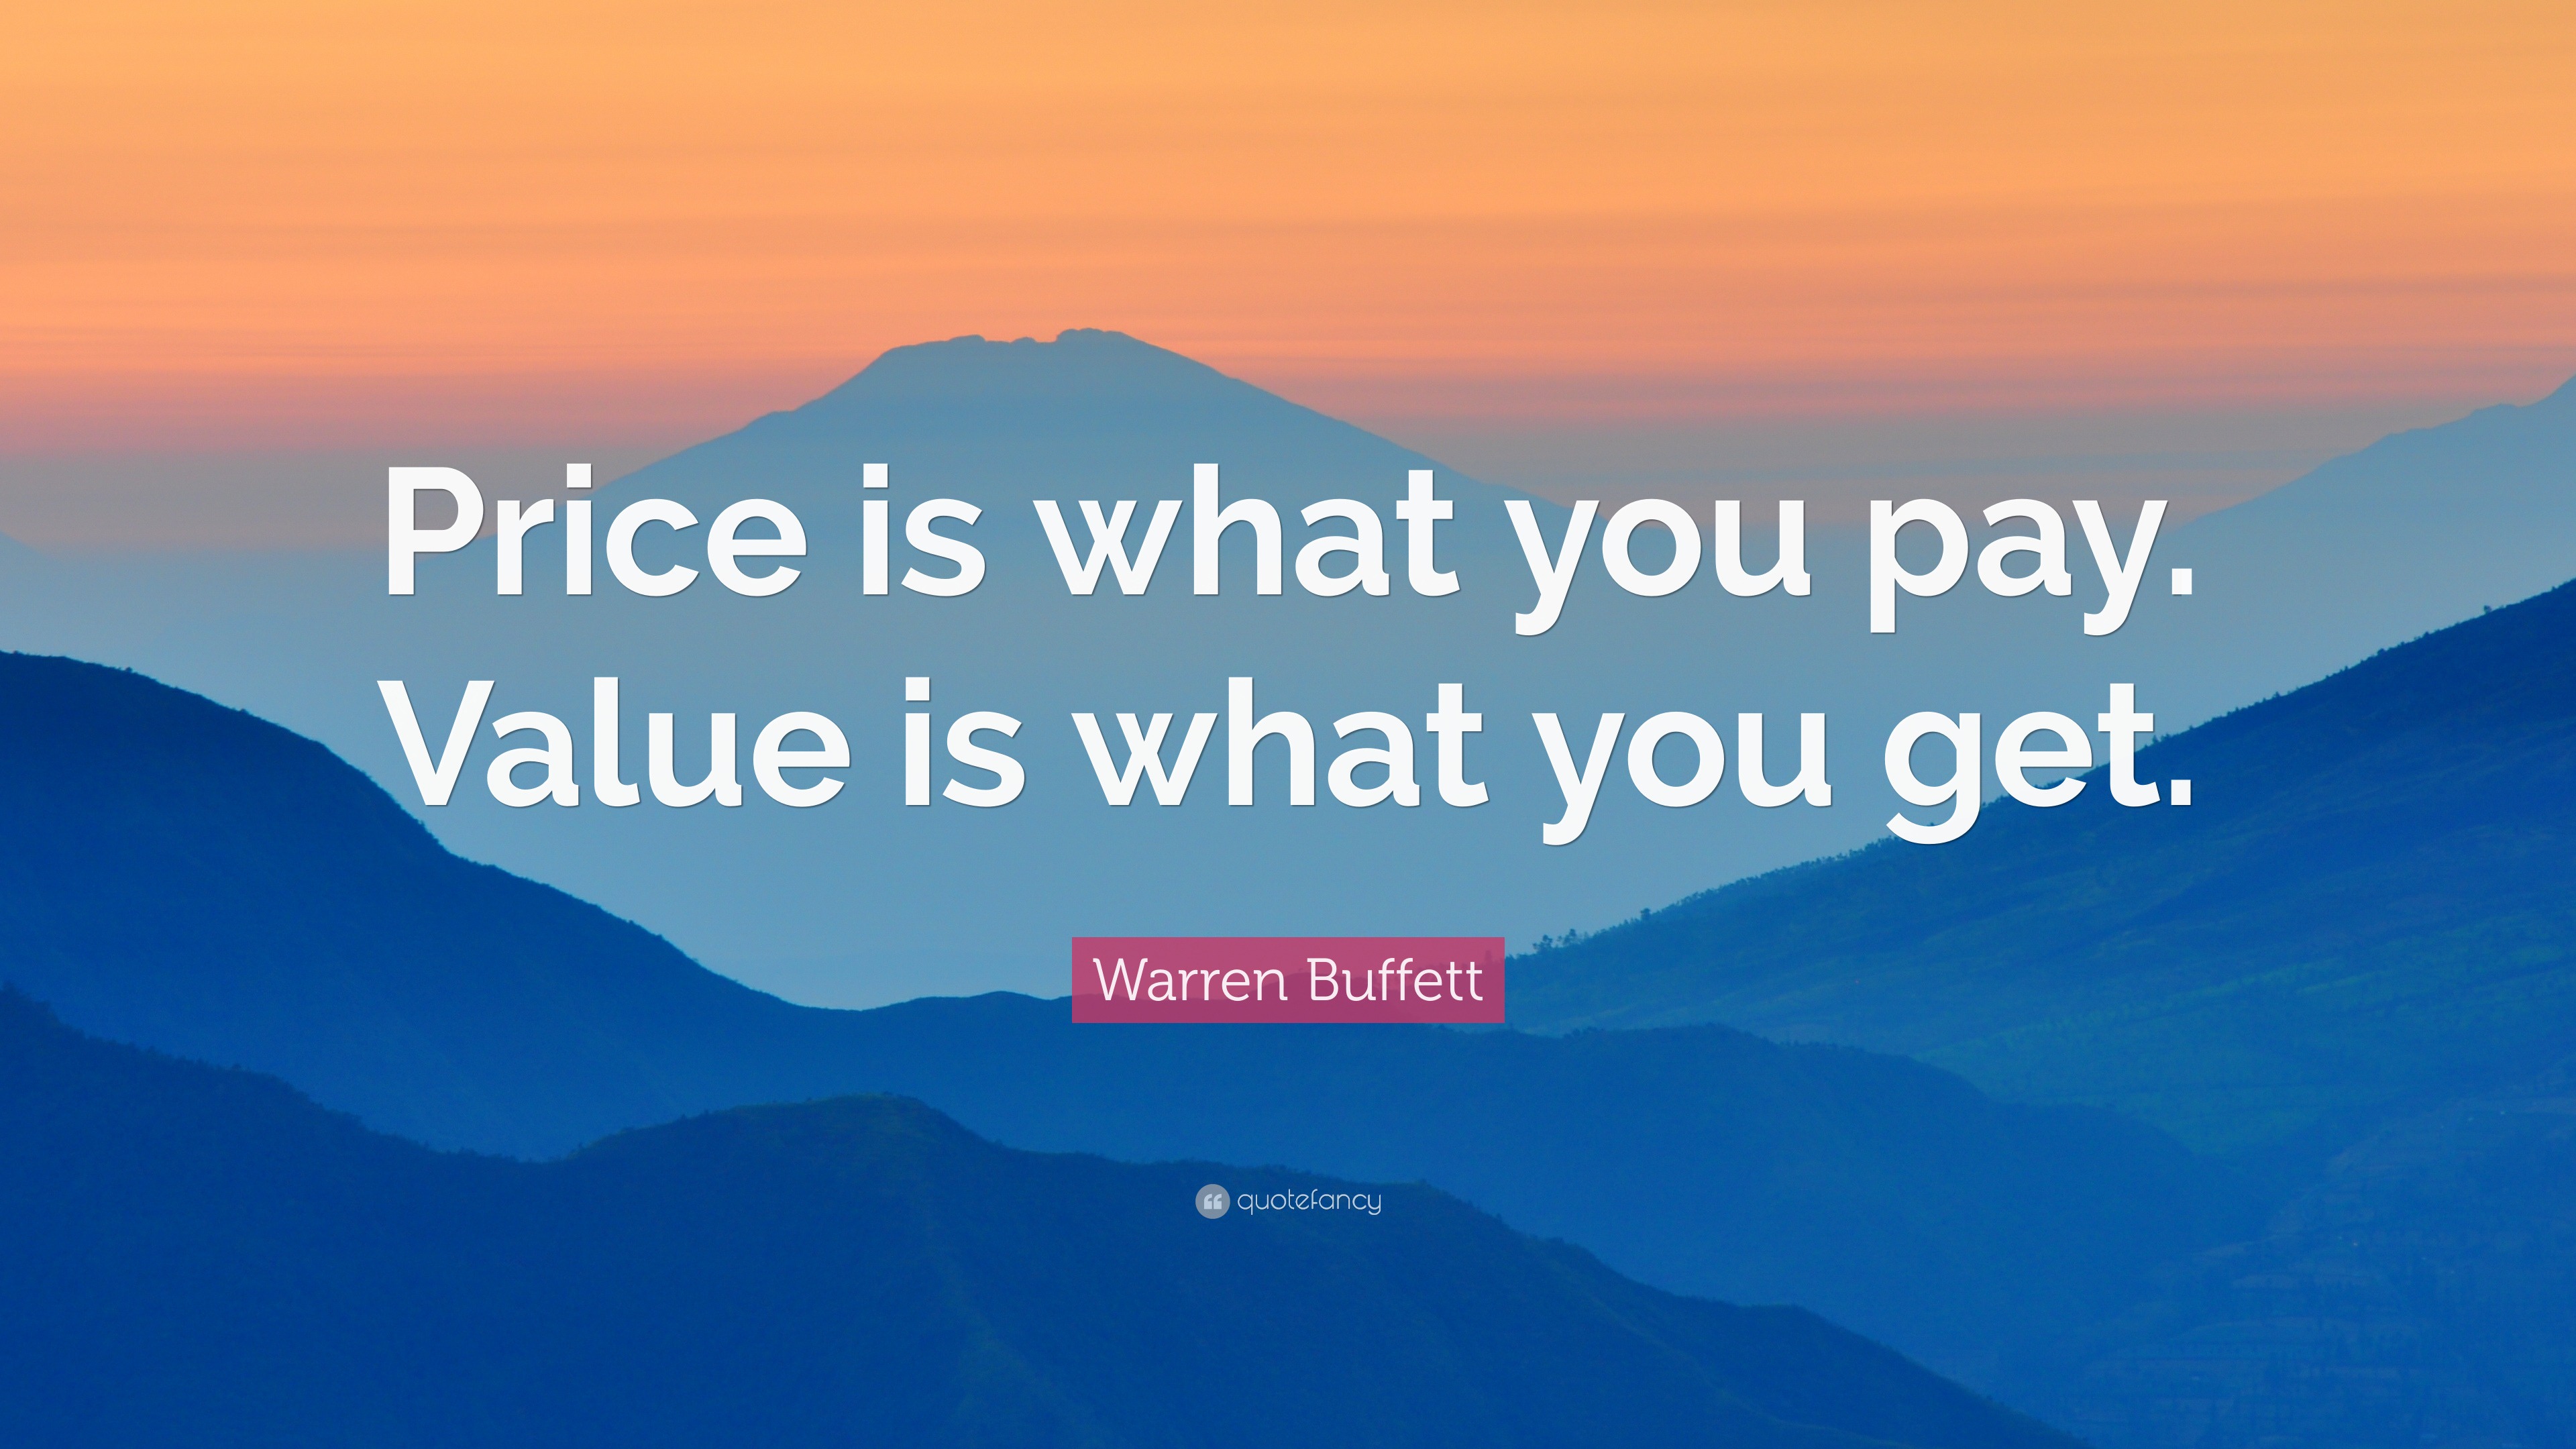 2003790 Warren Buffett Quote Price is what you pay Value is what you get